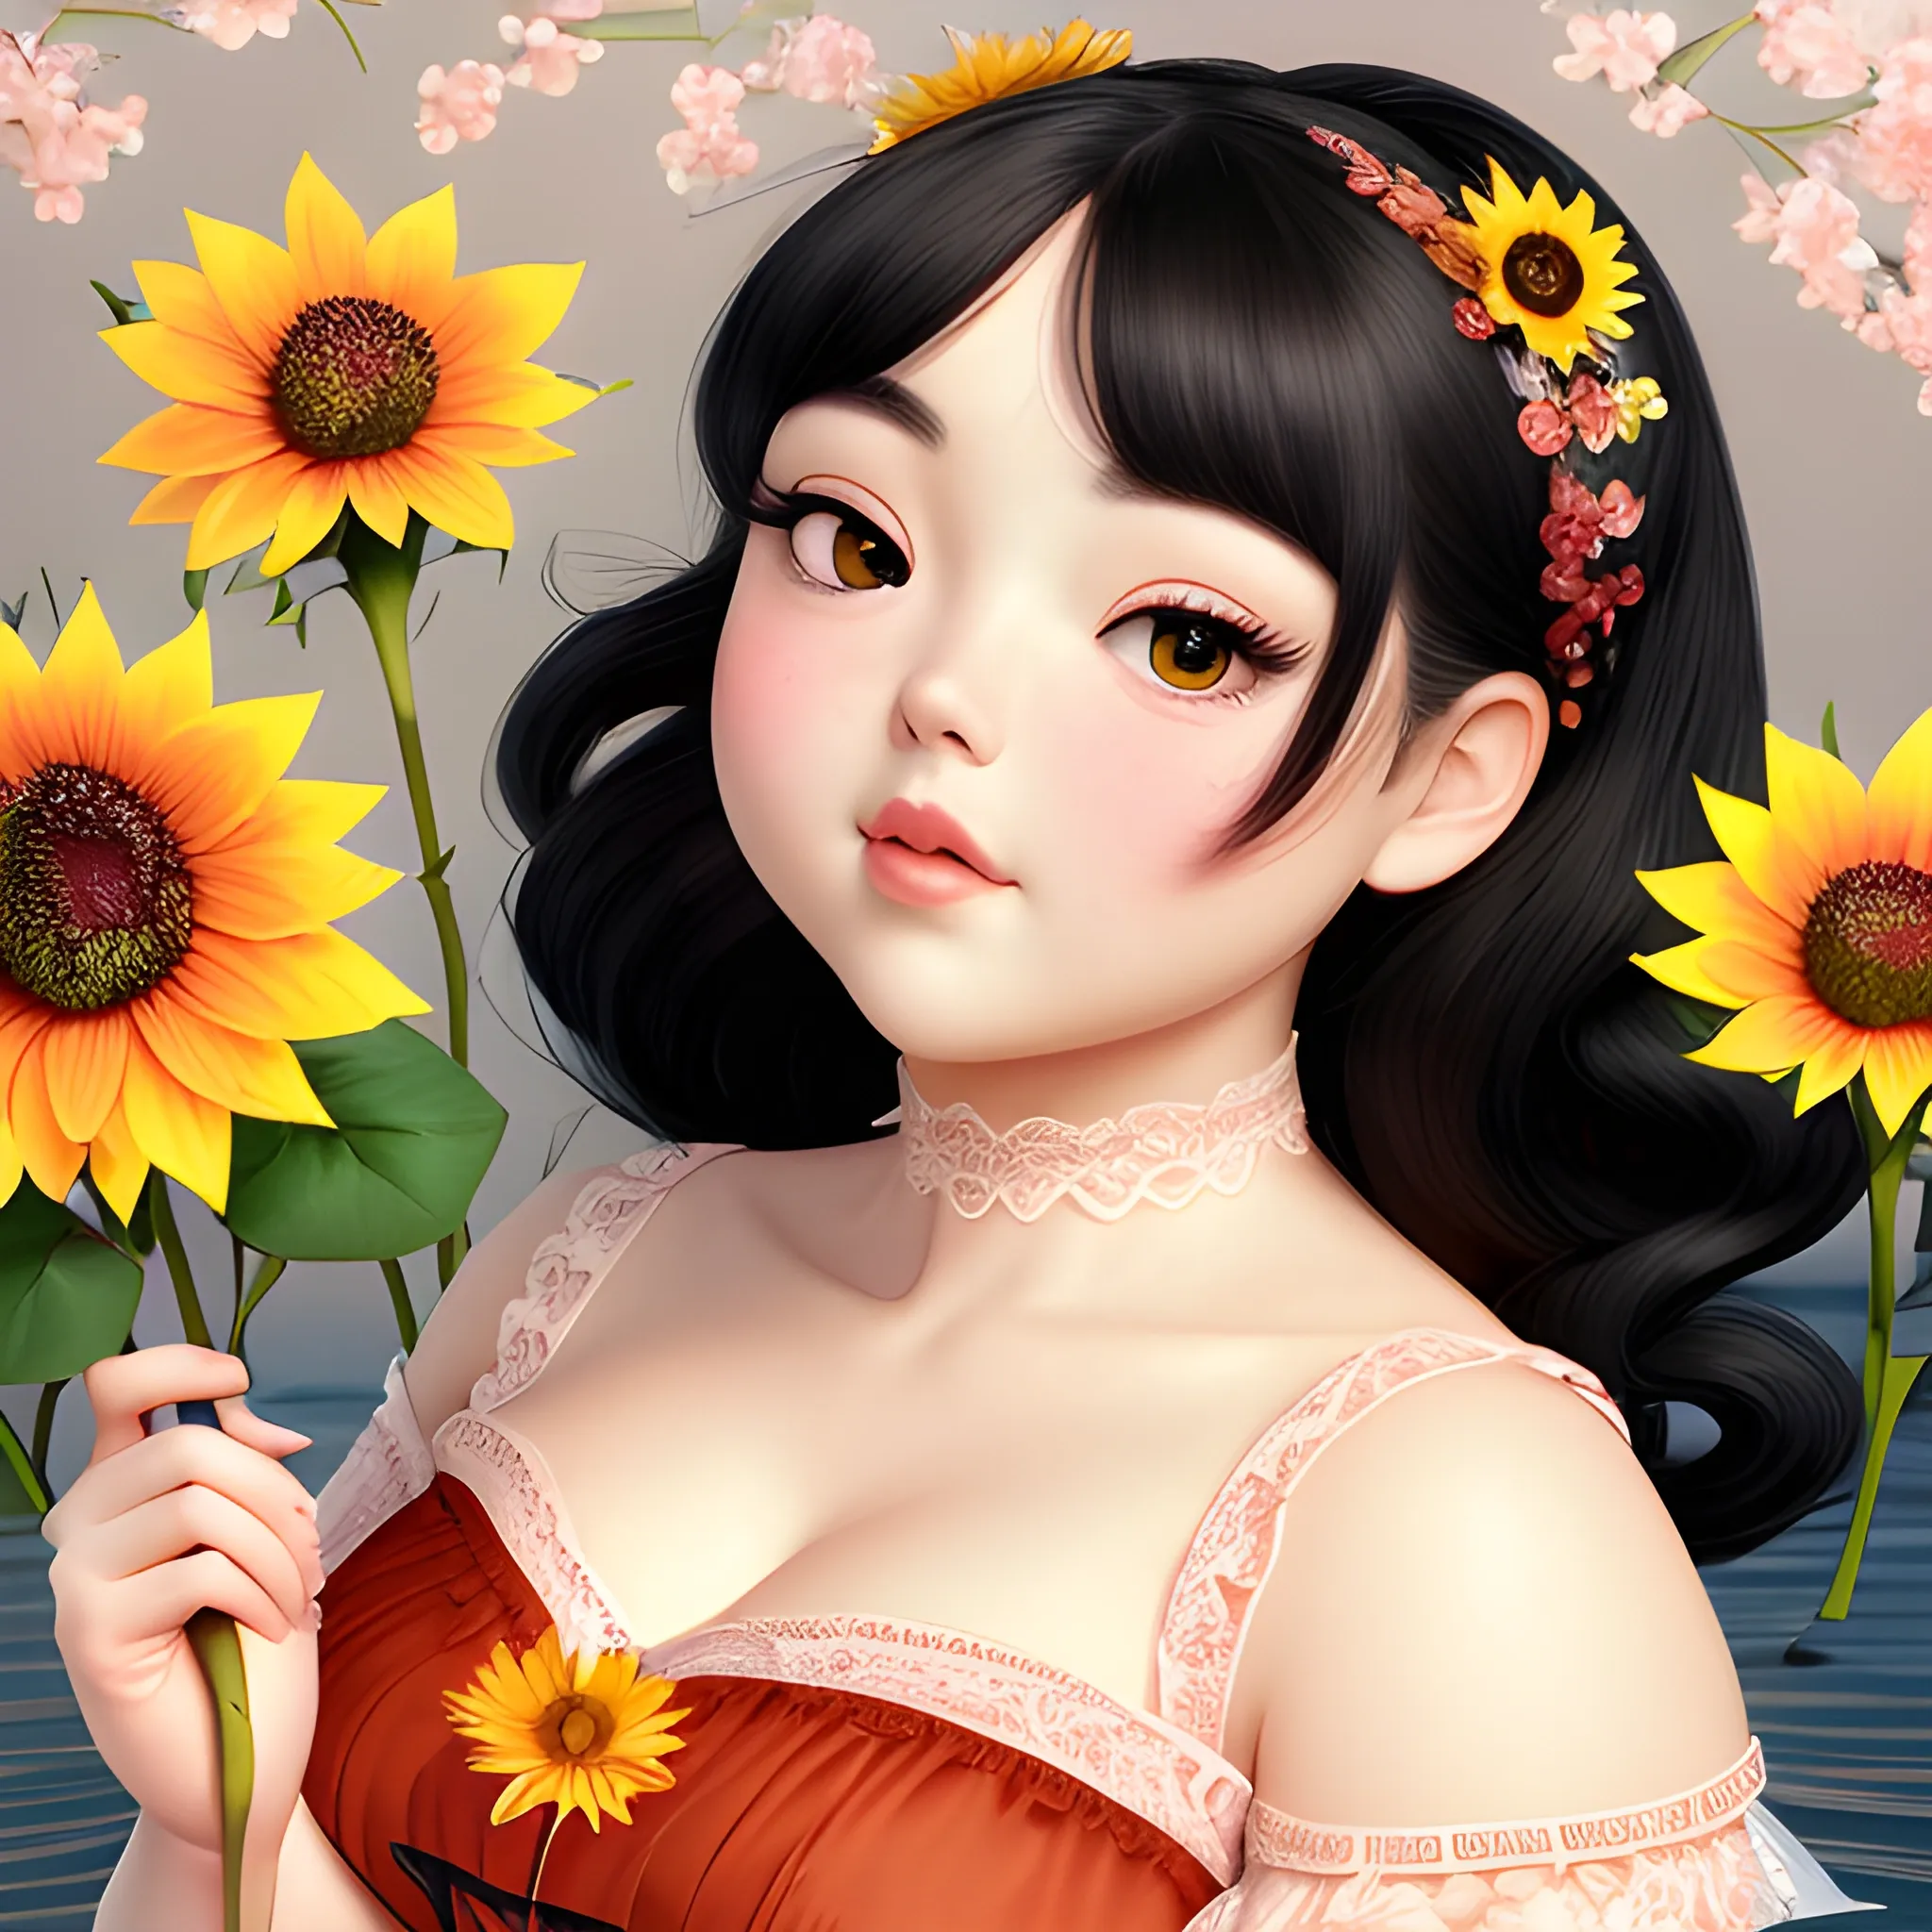 (((high detail))), best quality, Warm Colors, (detailed), (high resolution)Black-haired female, curvy face, with rosy cheeks, big black eyes, thick eyelashes, thick peach lips, thick eyebrows, nose upturned, lying on water, holding a sunflower, a rose, a jasmine, a cherry blossom, a white lotus, wearing a red lace dress.